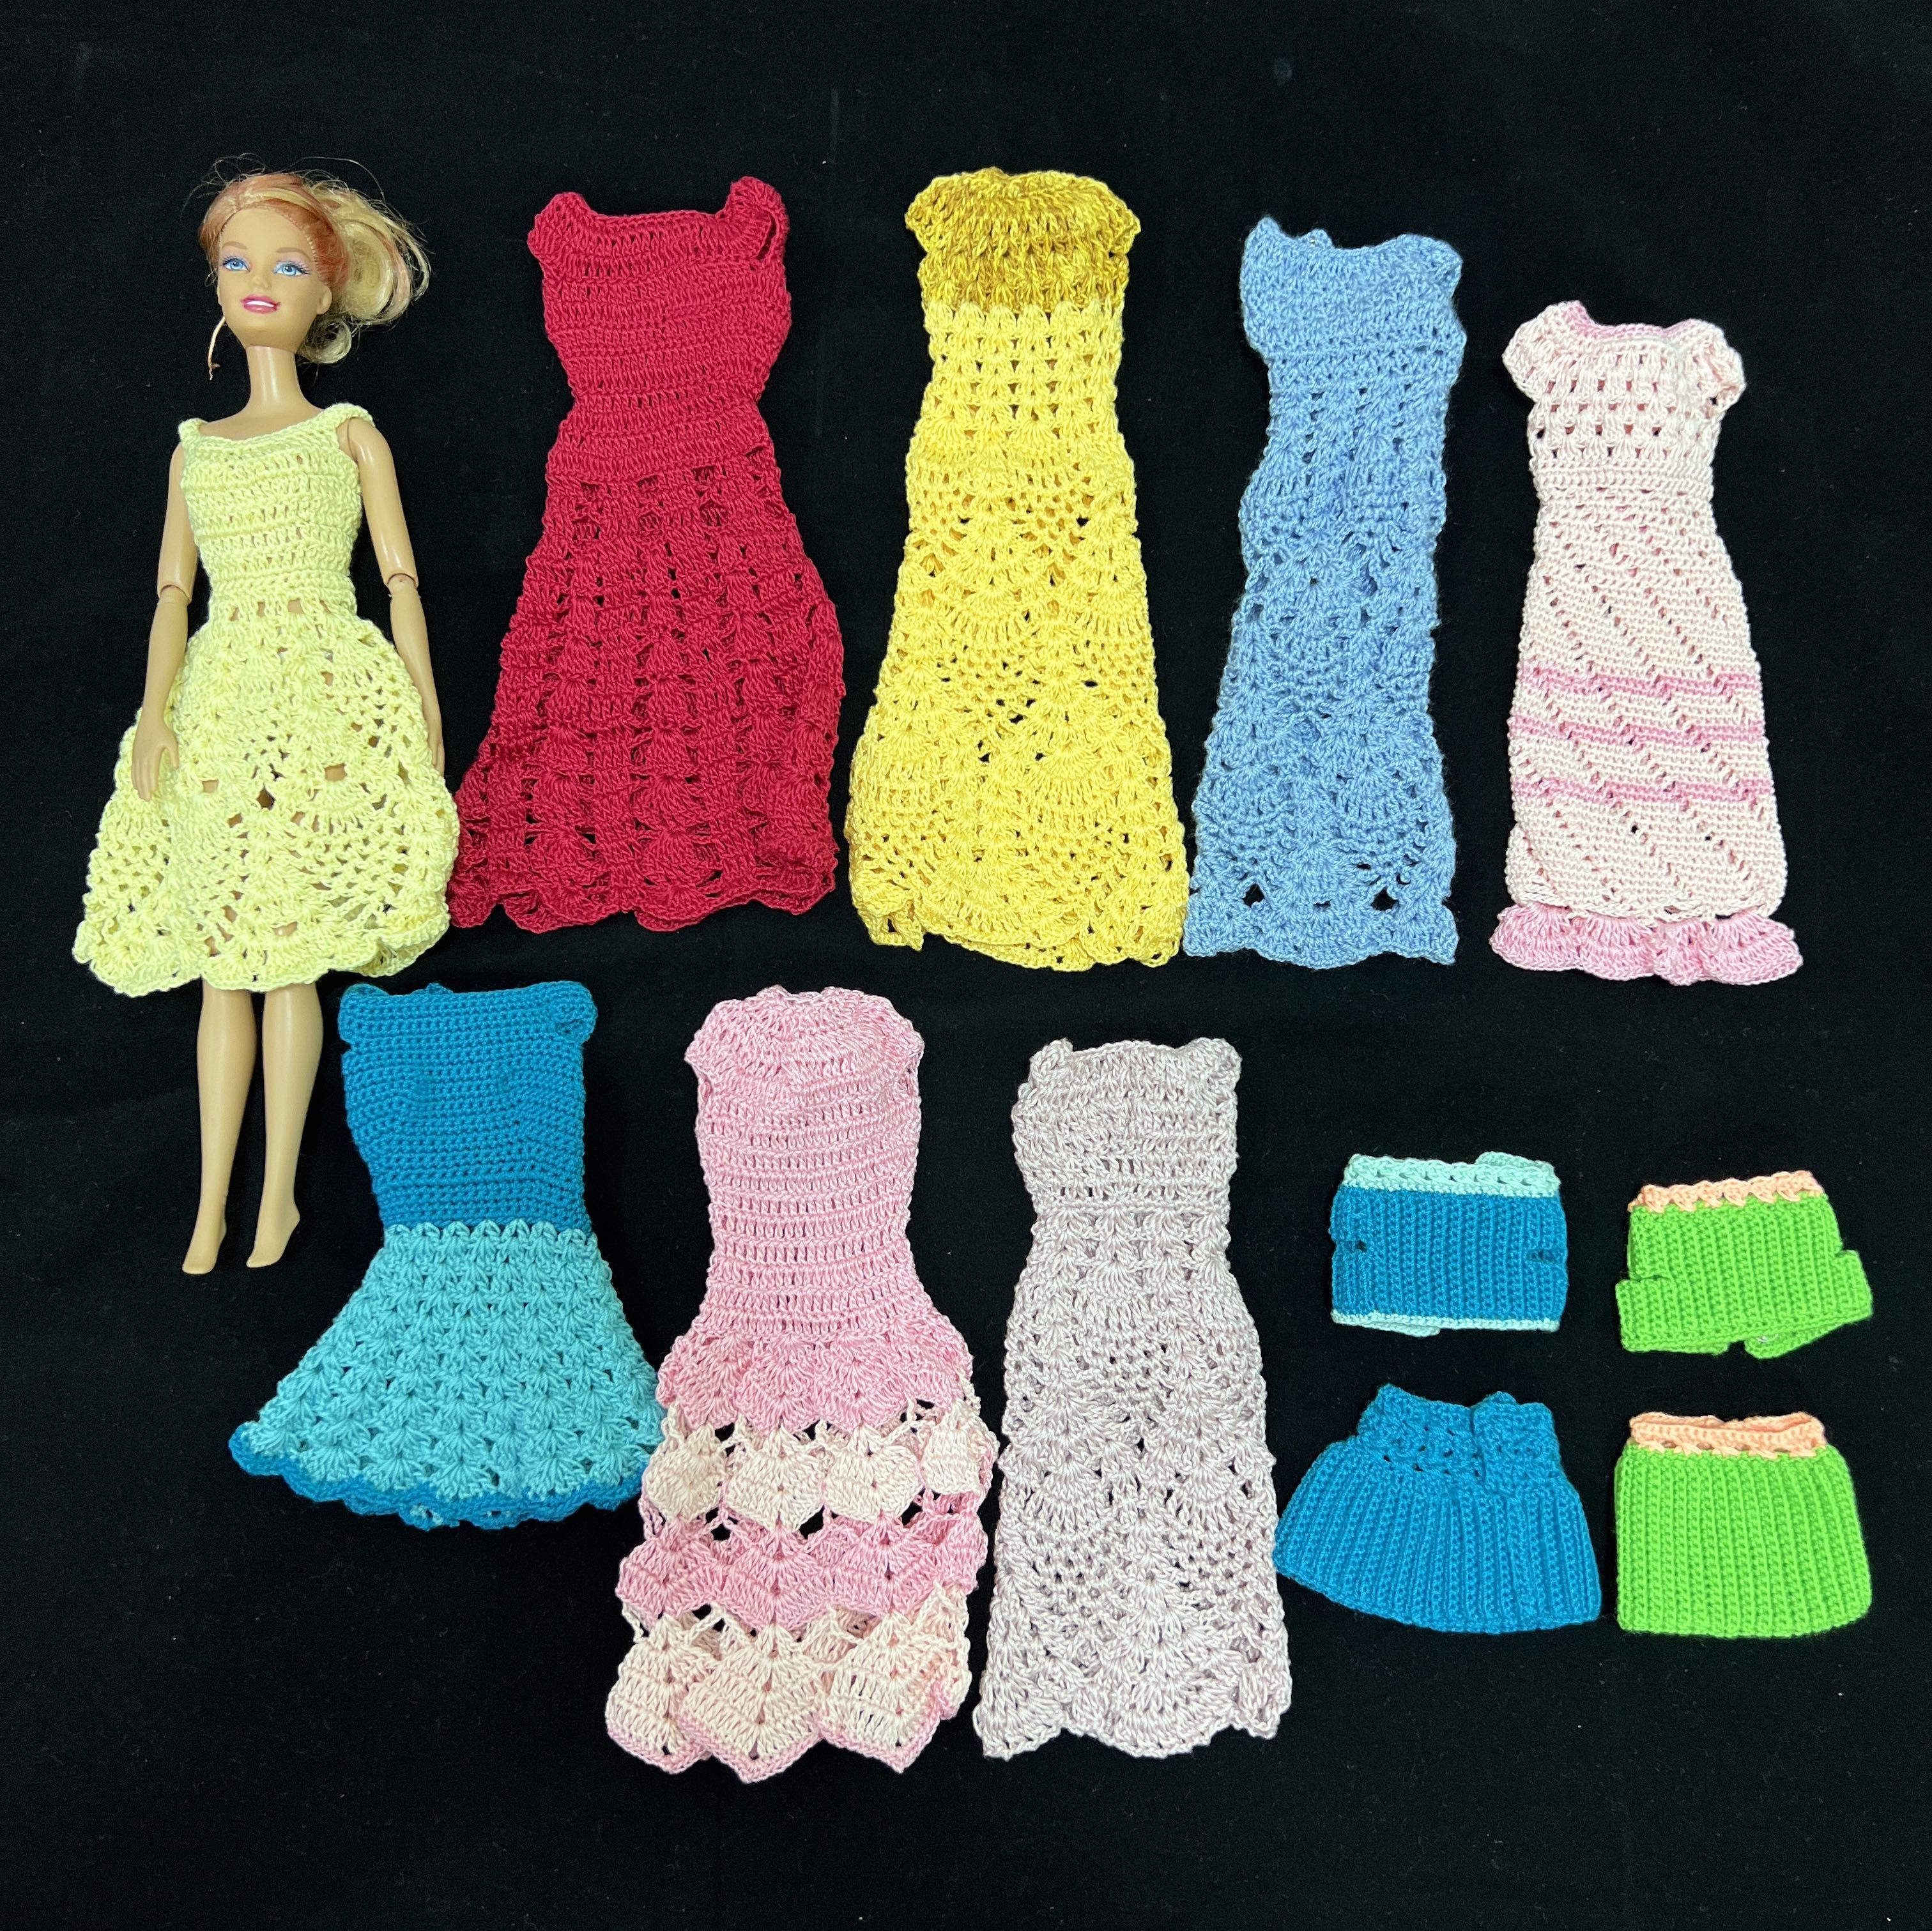 10 Pcs Doll Dress Pack Fashion Handmade Outfits For Barbie Dolls